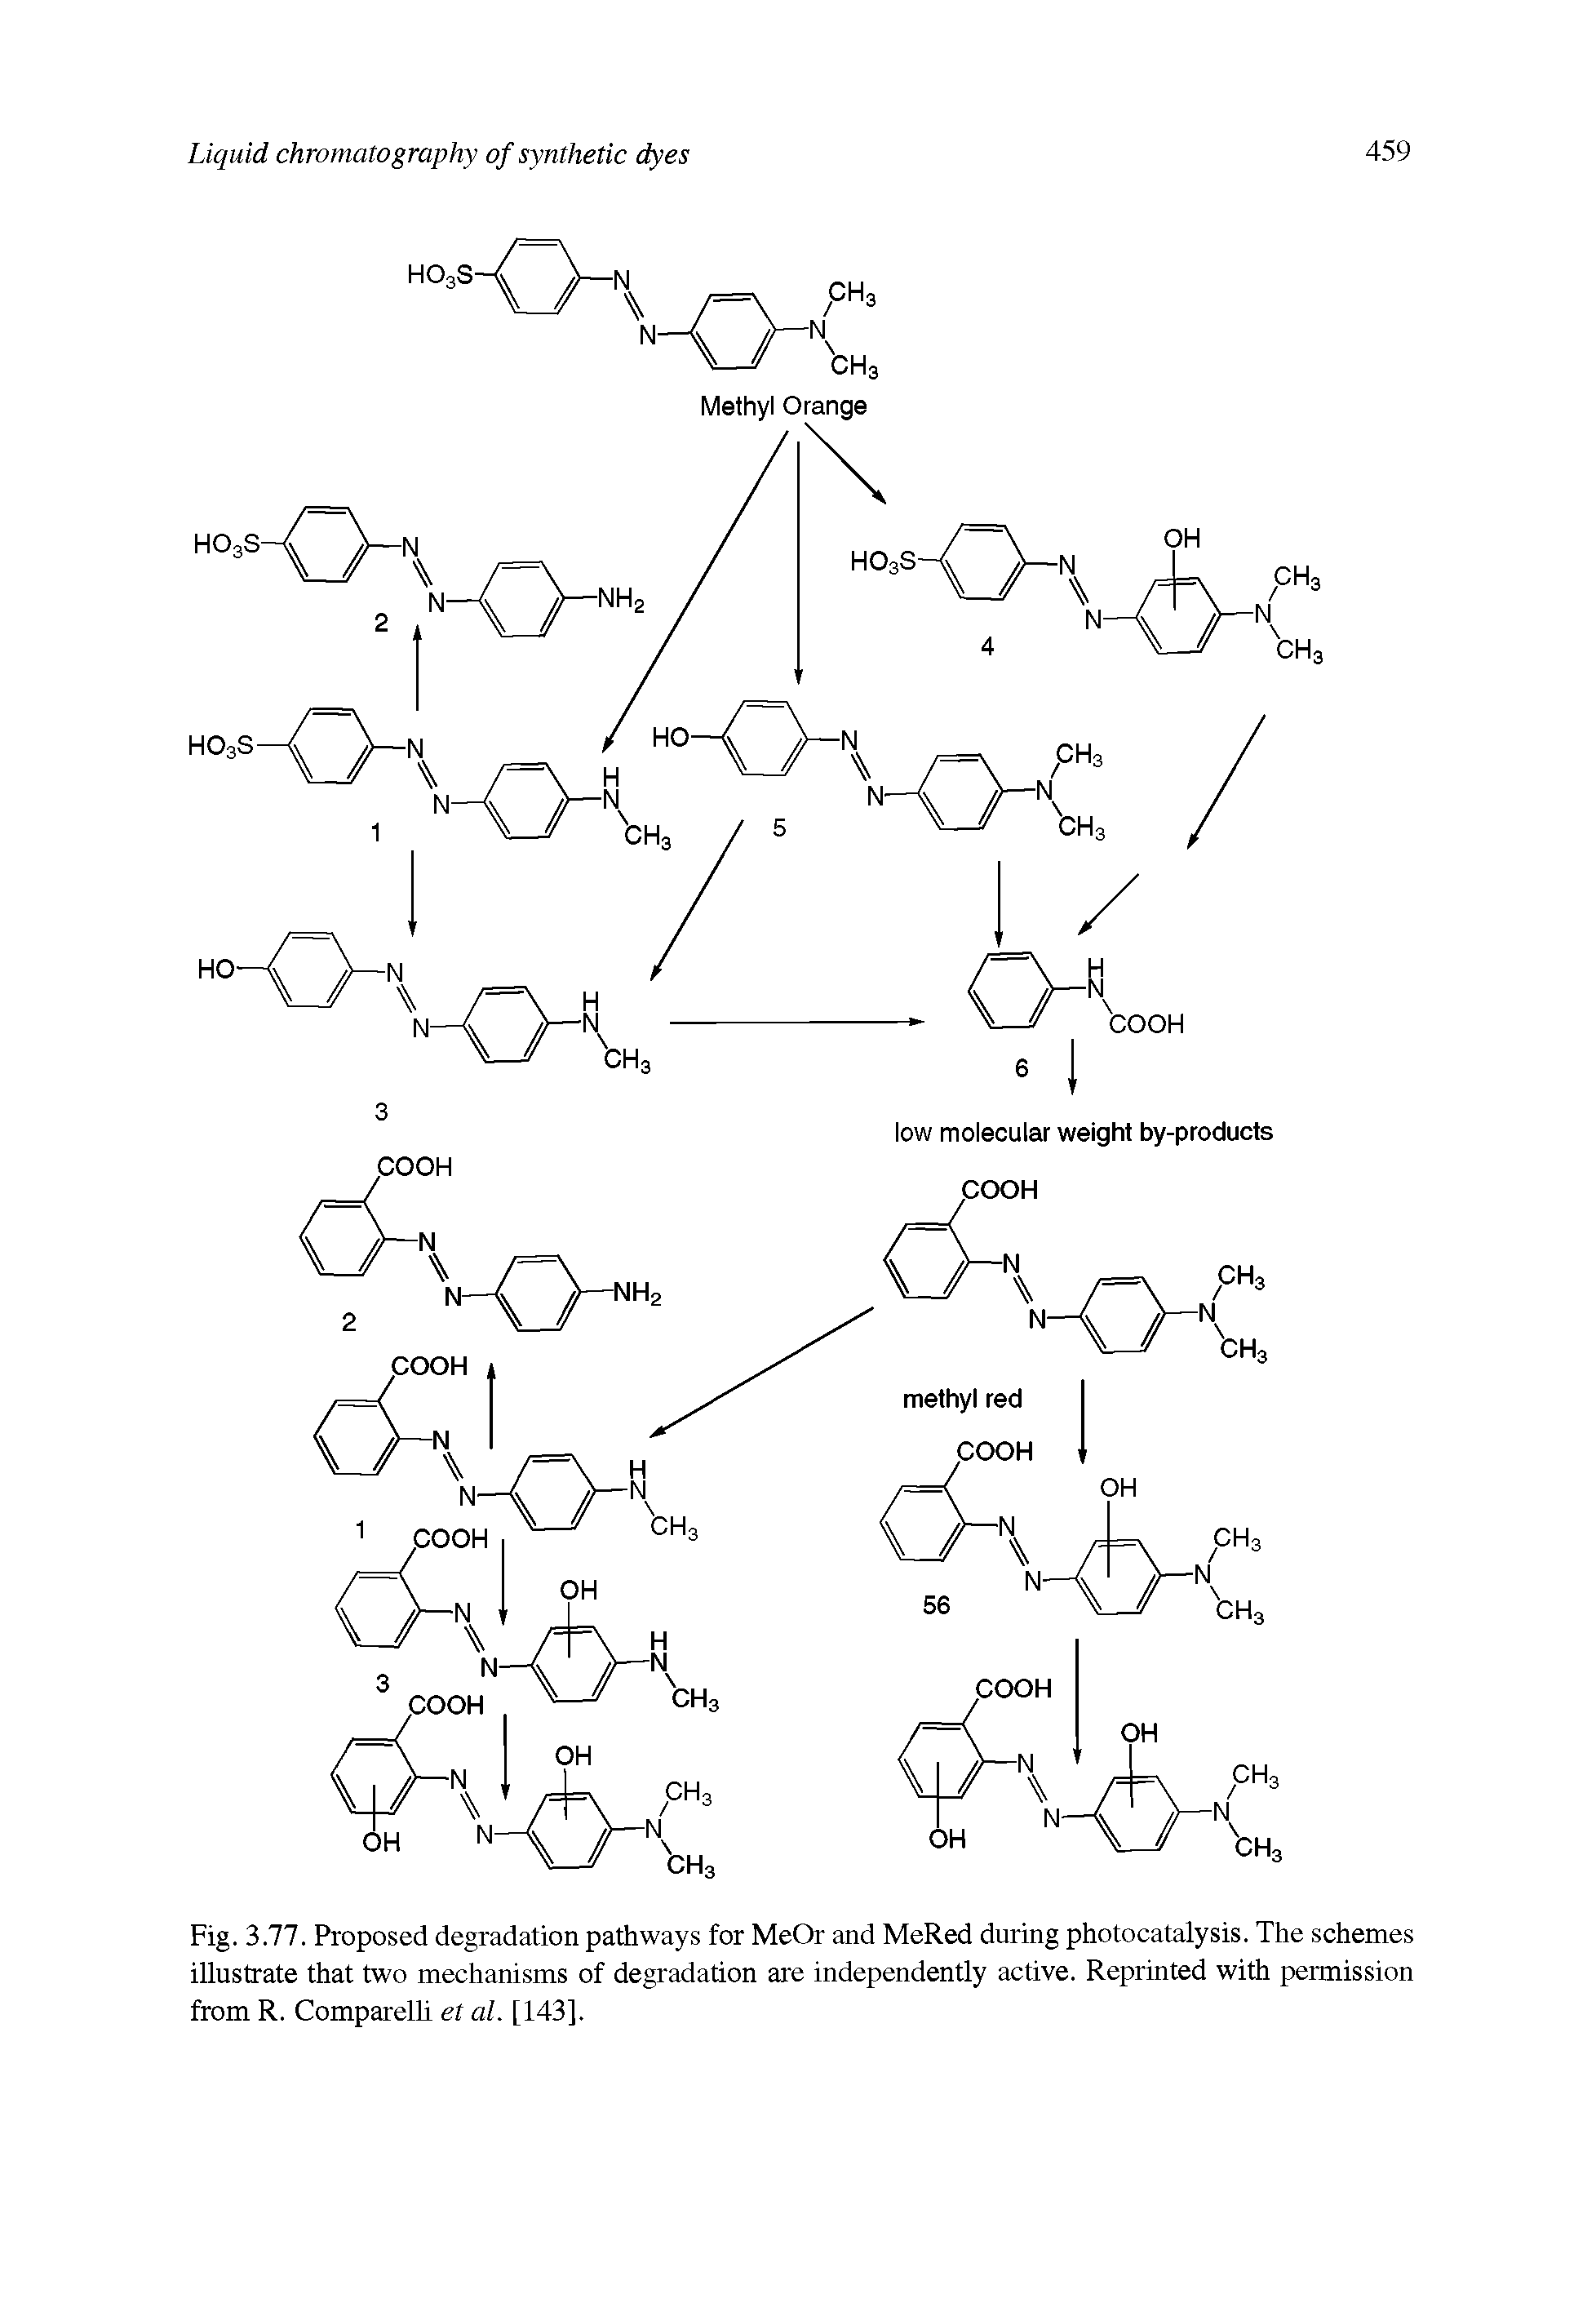 Fig. 3.77. Proposed degradation pathways for MeOr and MeRed during photocatalysis. The schemes illustrate that two mechanisms of degradation are independently active. Reprinted with permission from R. Comparelli et al. [143],...